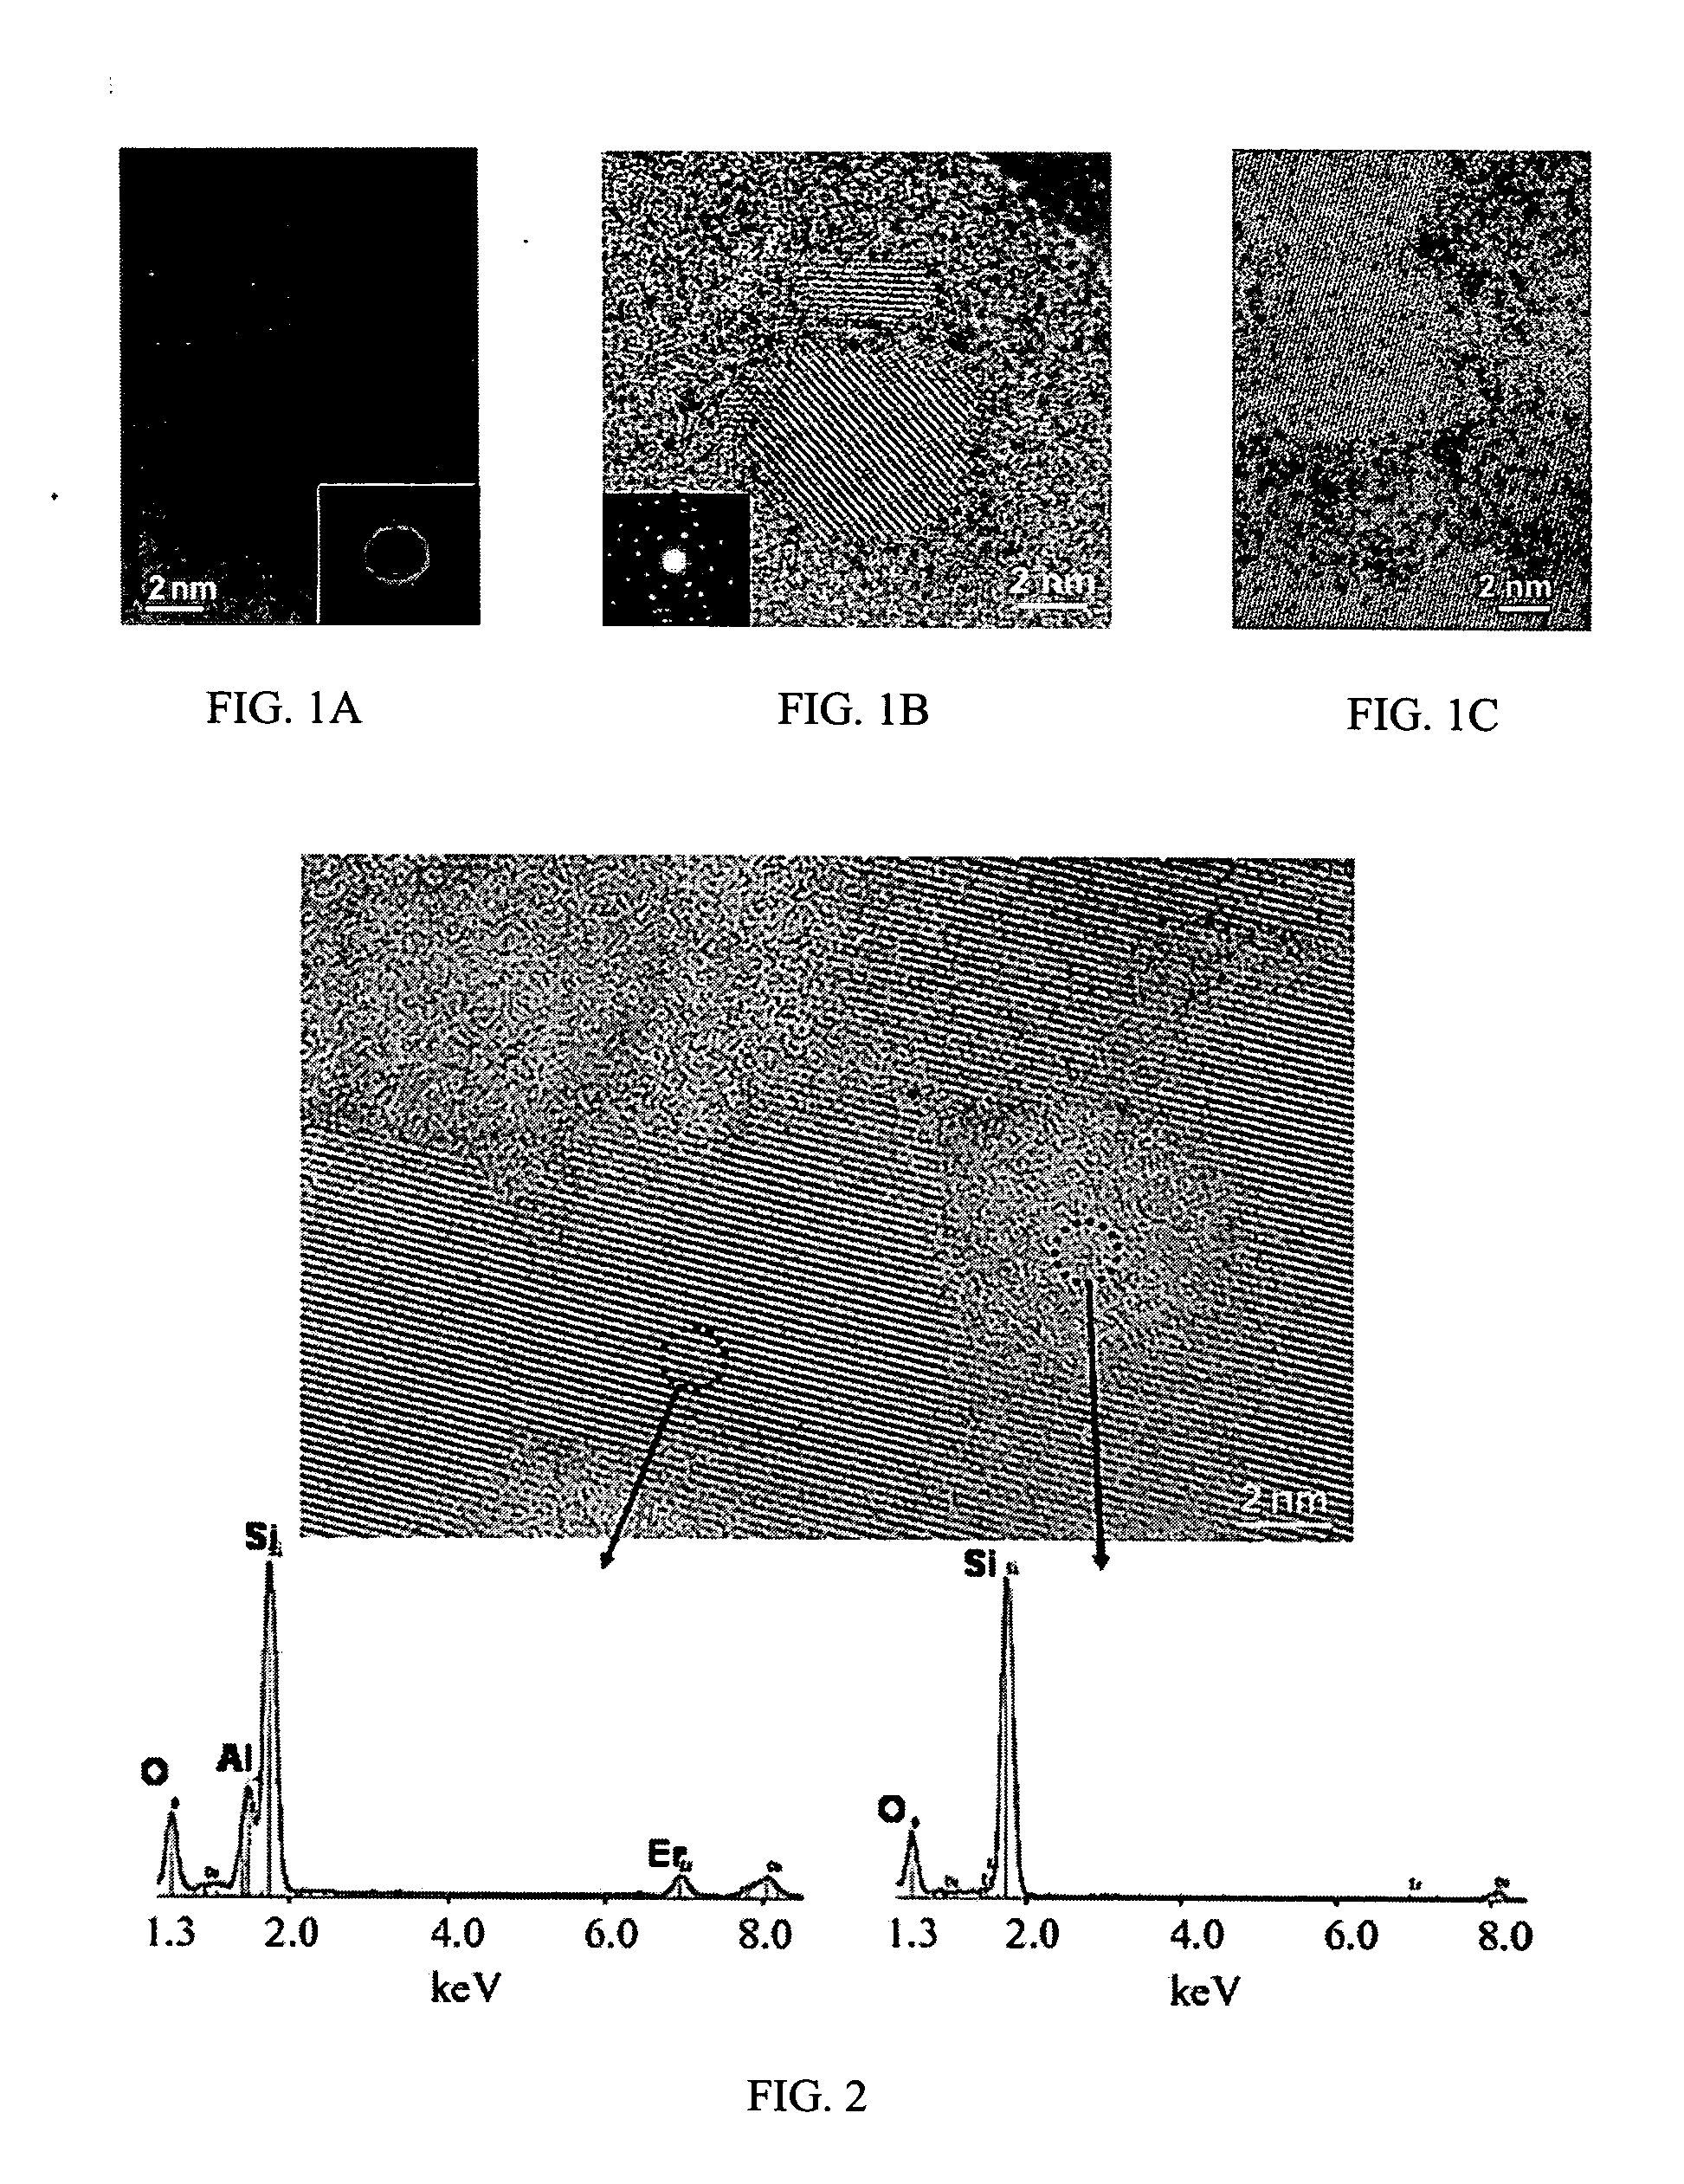 Nanostructured re-doped SiO2-base fluorescent materials and methods for production of same